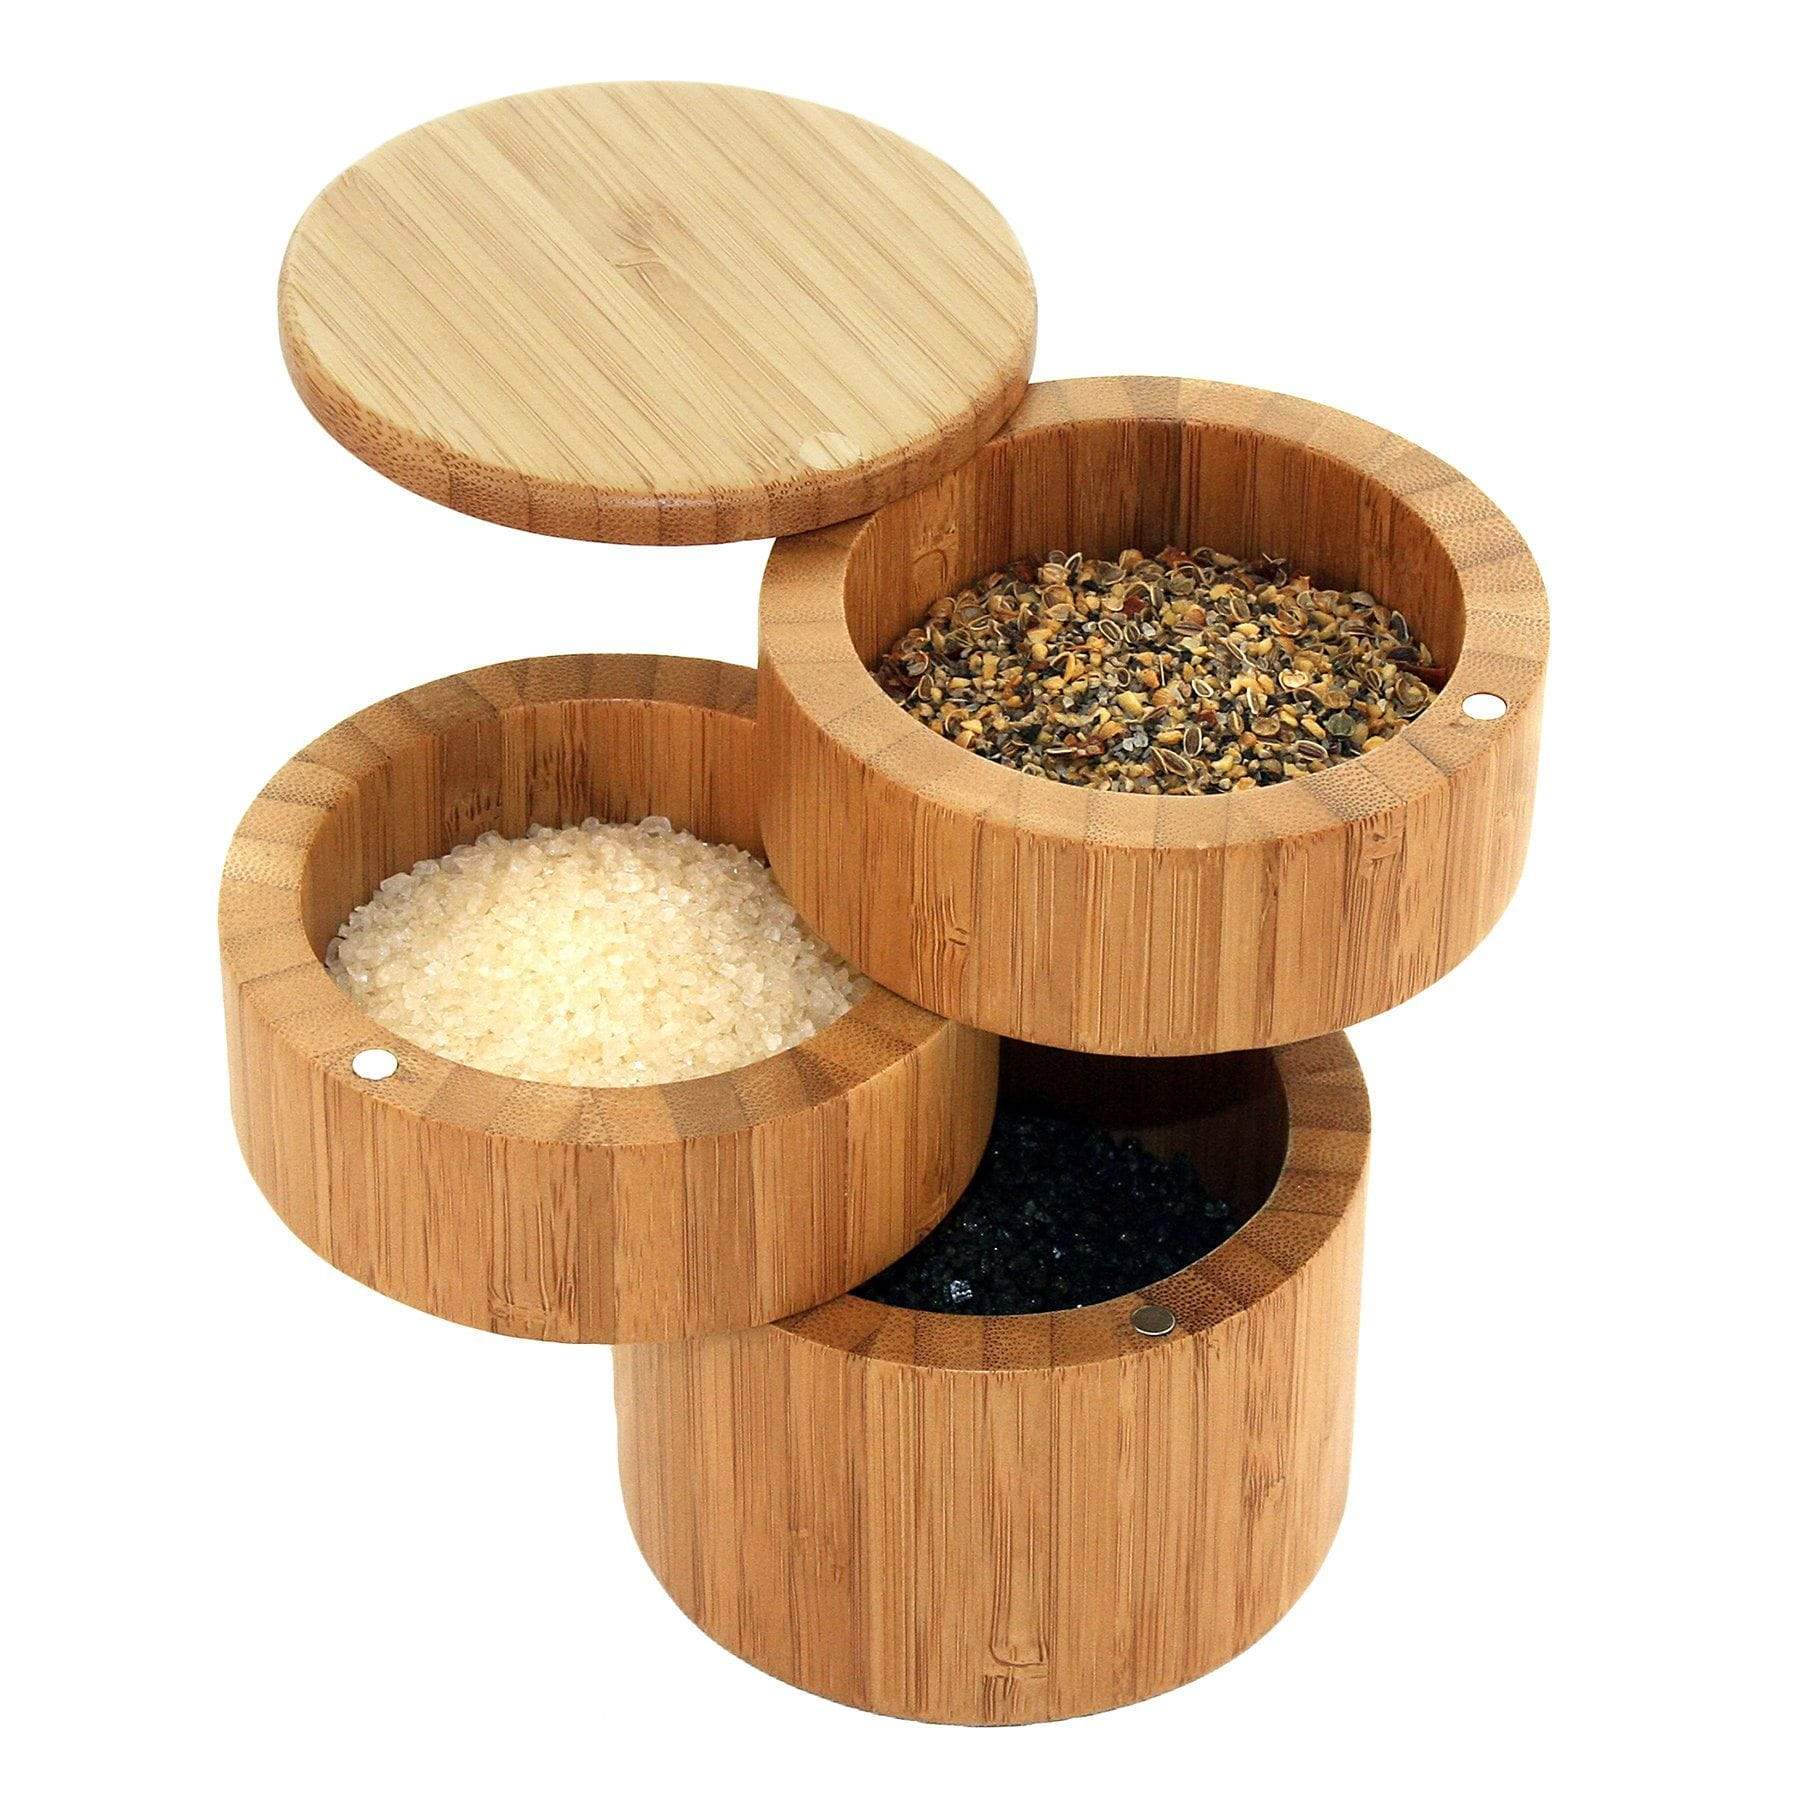 Totally Bamboo Triple Bamboo Salt Box with Magnetic Swivel Lids